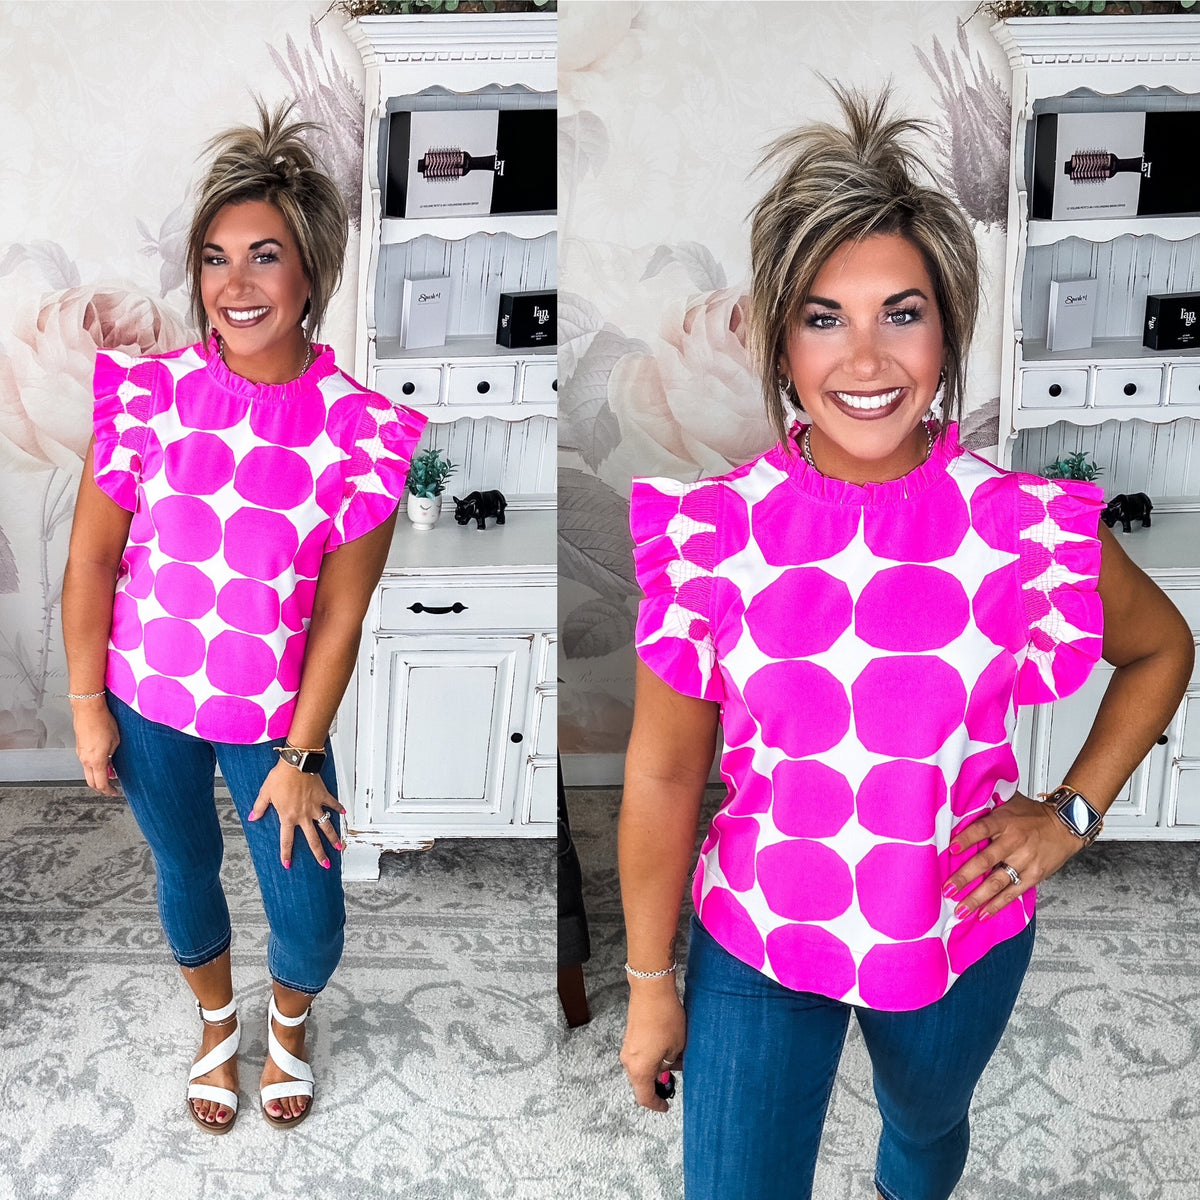 Out the Door Blouse - Hot Pink